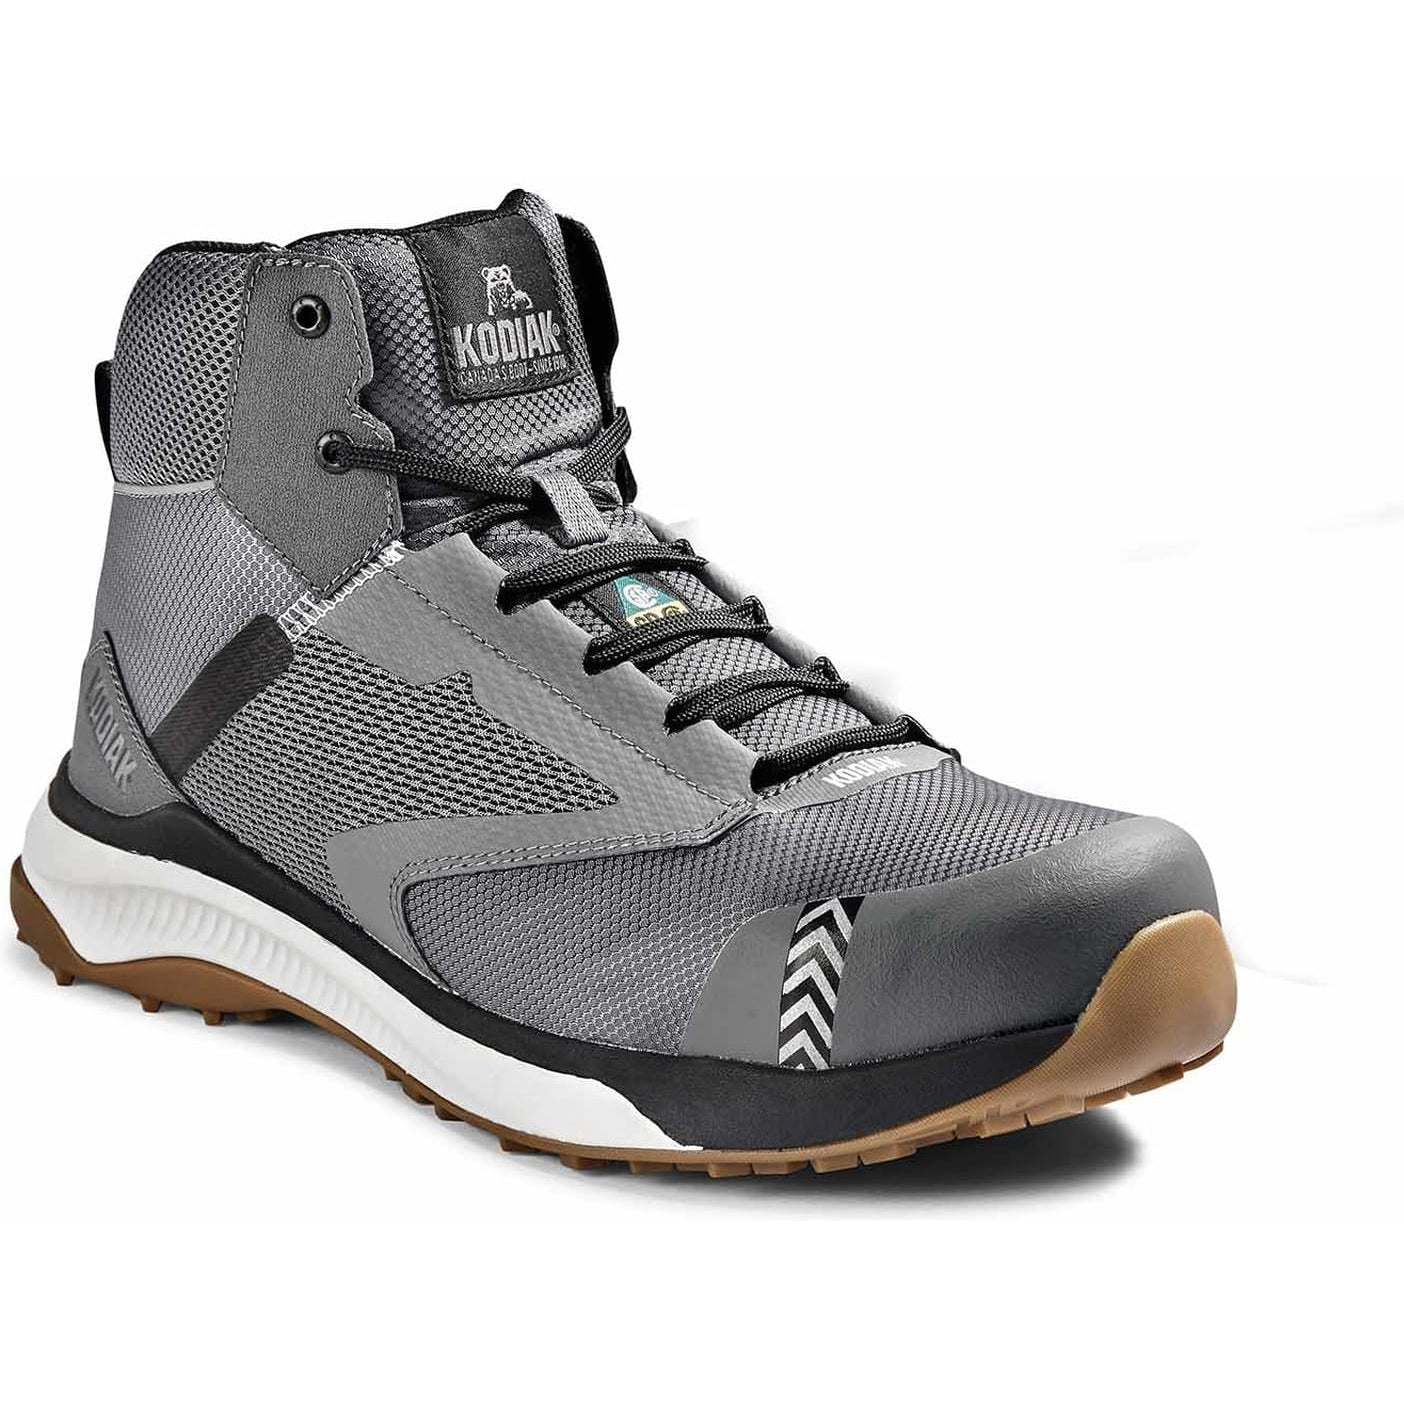 Kodiak Men's Quicktrail Mid CT Athletic Safety Work Shoe -Gray- 4TF5GY 7 / Wide / Grey - Overlook Boots